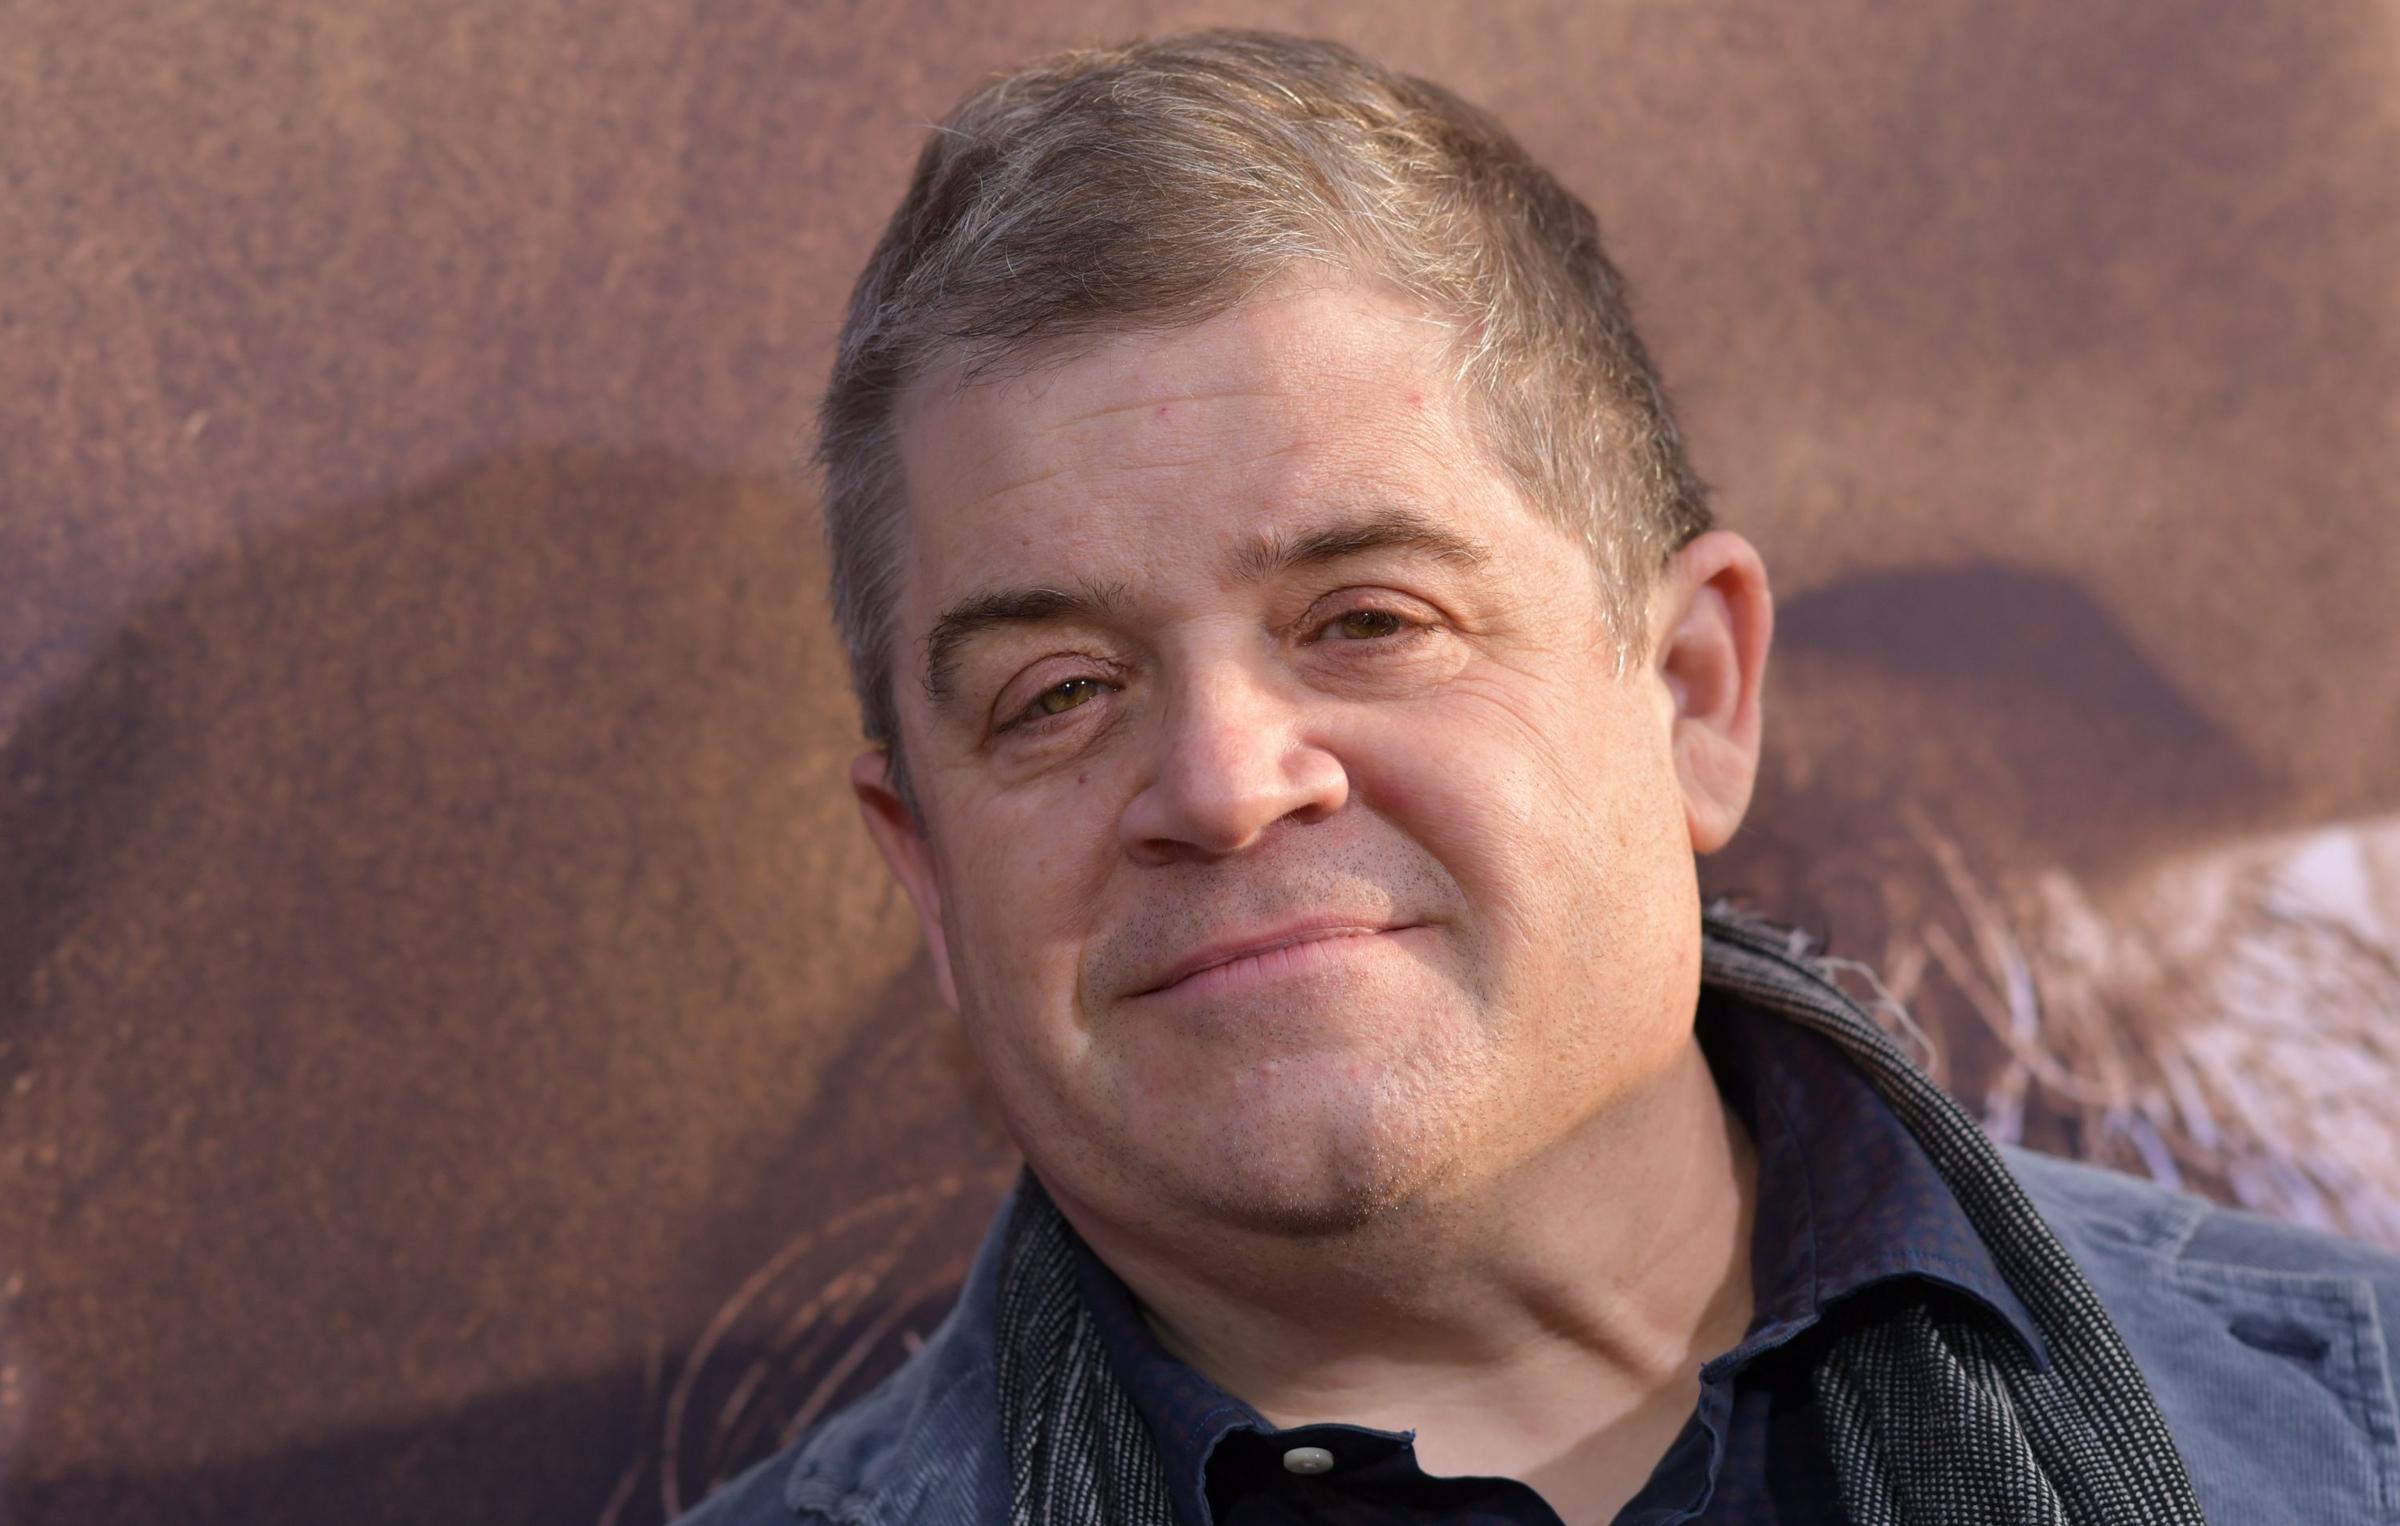 Comedian Patton Oswalt On Parenting, Loss And Keeping Humor Alive | KBIA